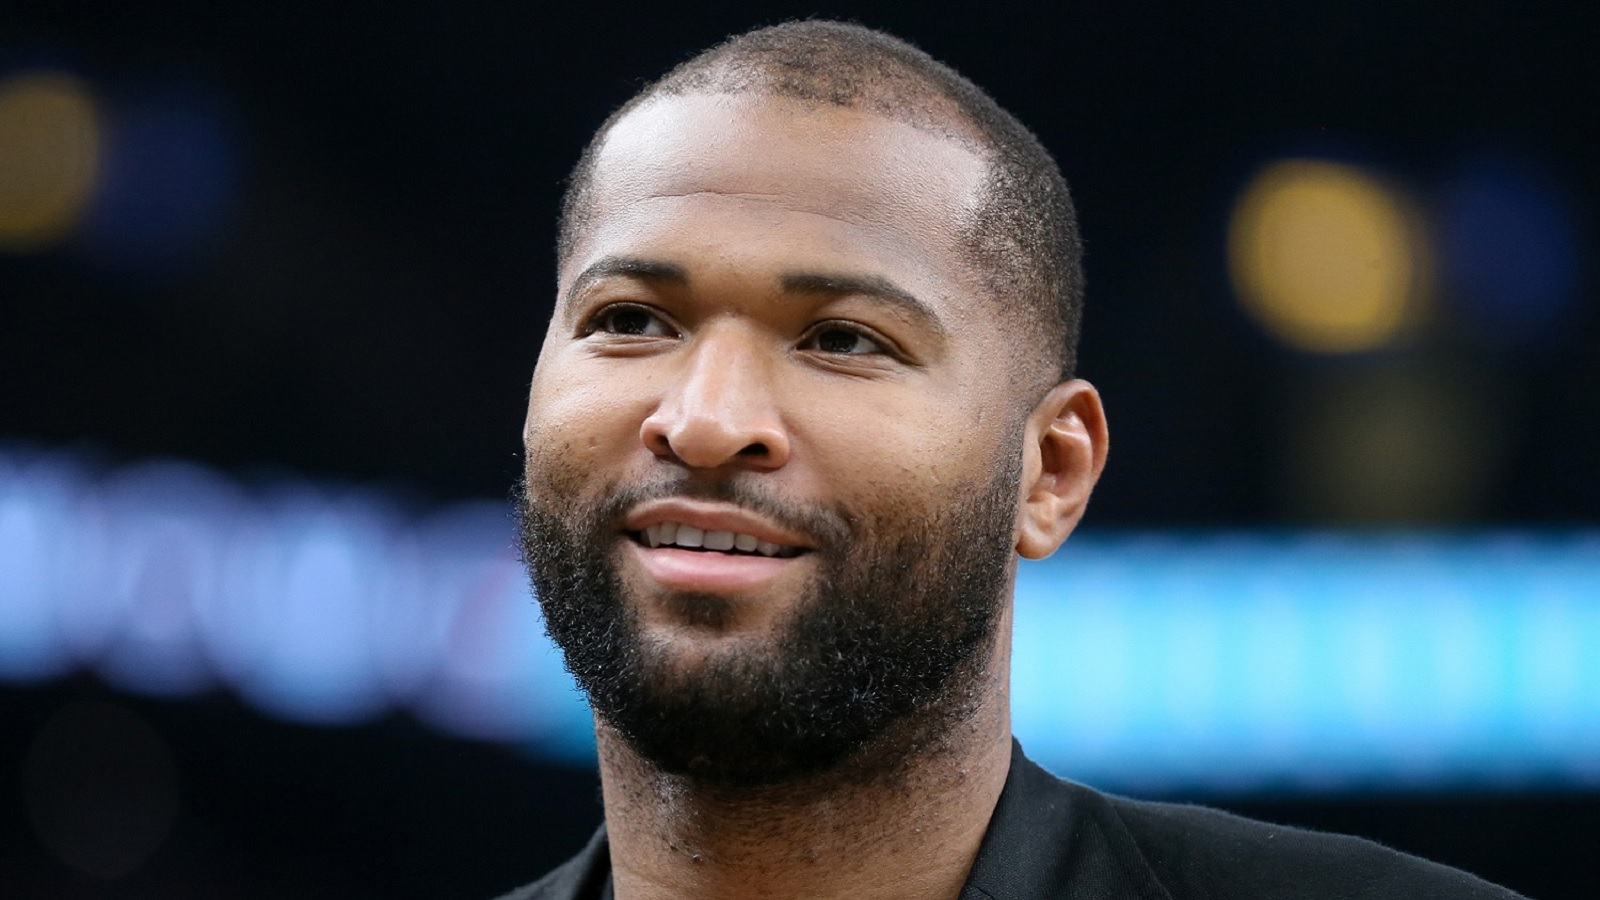 BREAKING: DeMarcus Cousins is signing with the Guaynabo Mets in